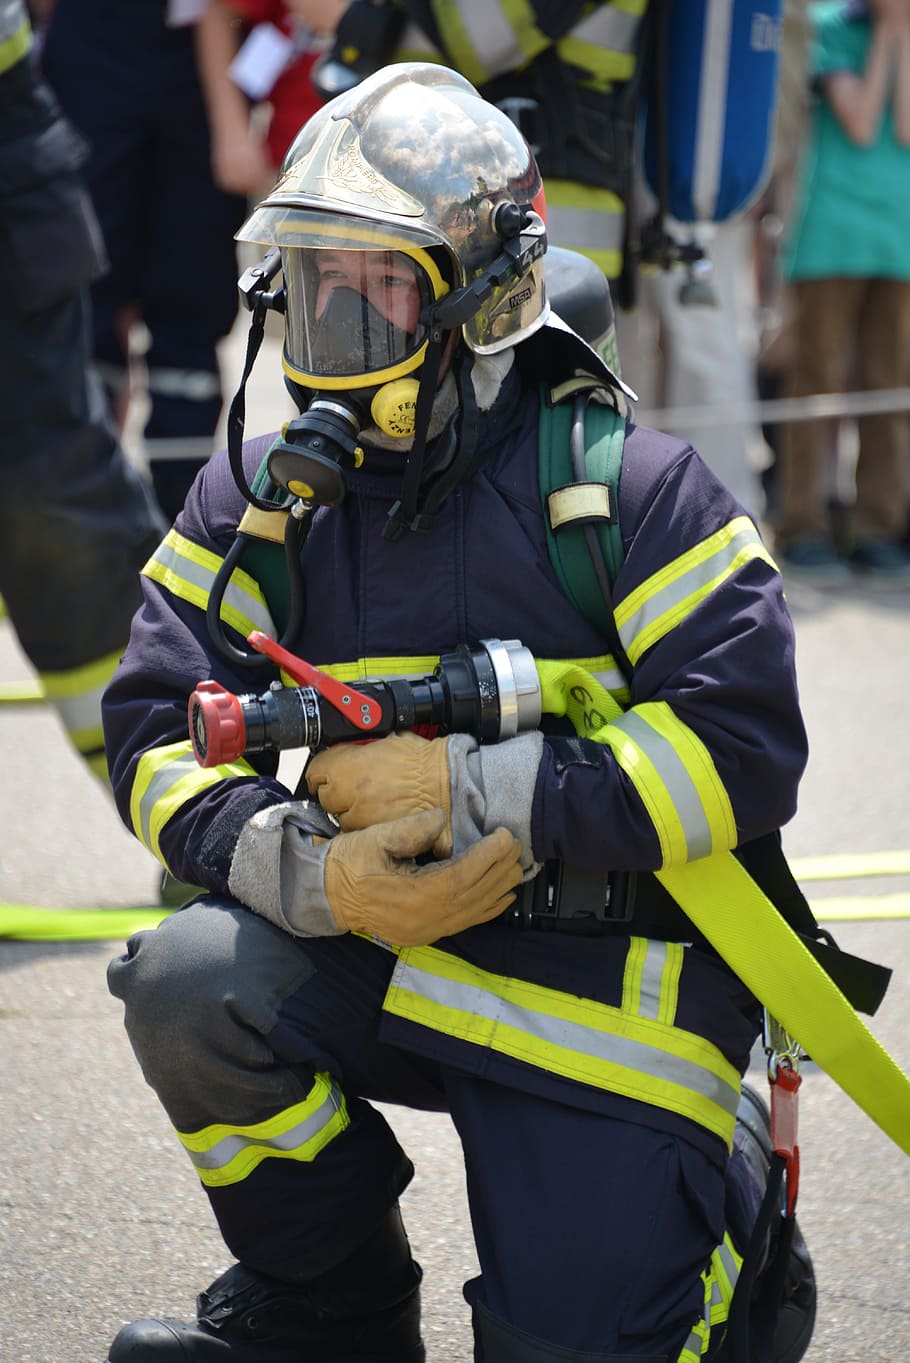 fire-fighter-fire-wear-protective-clothing-respiratory-protection.jpg